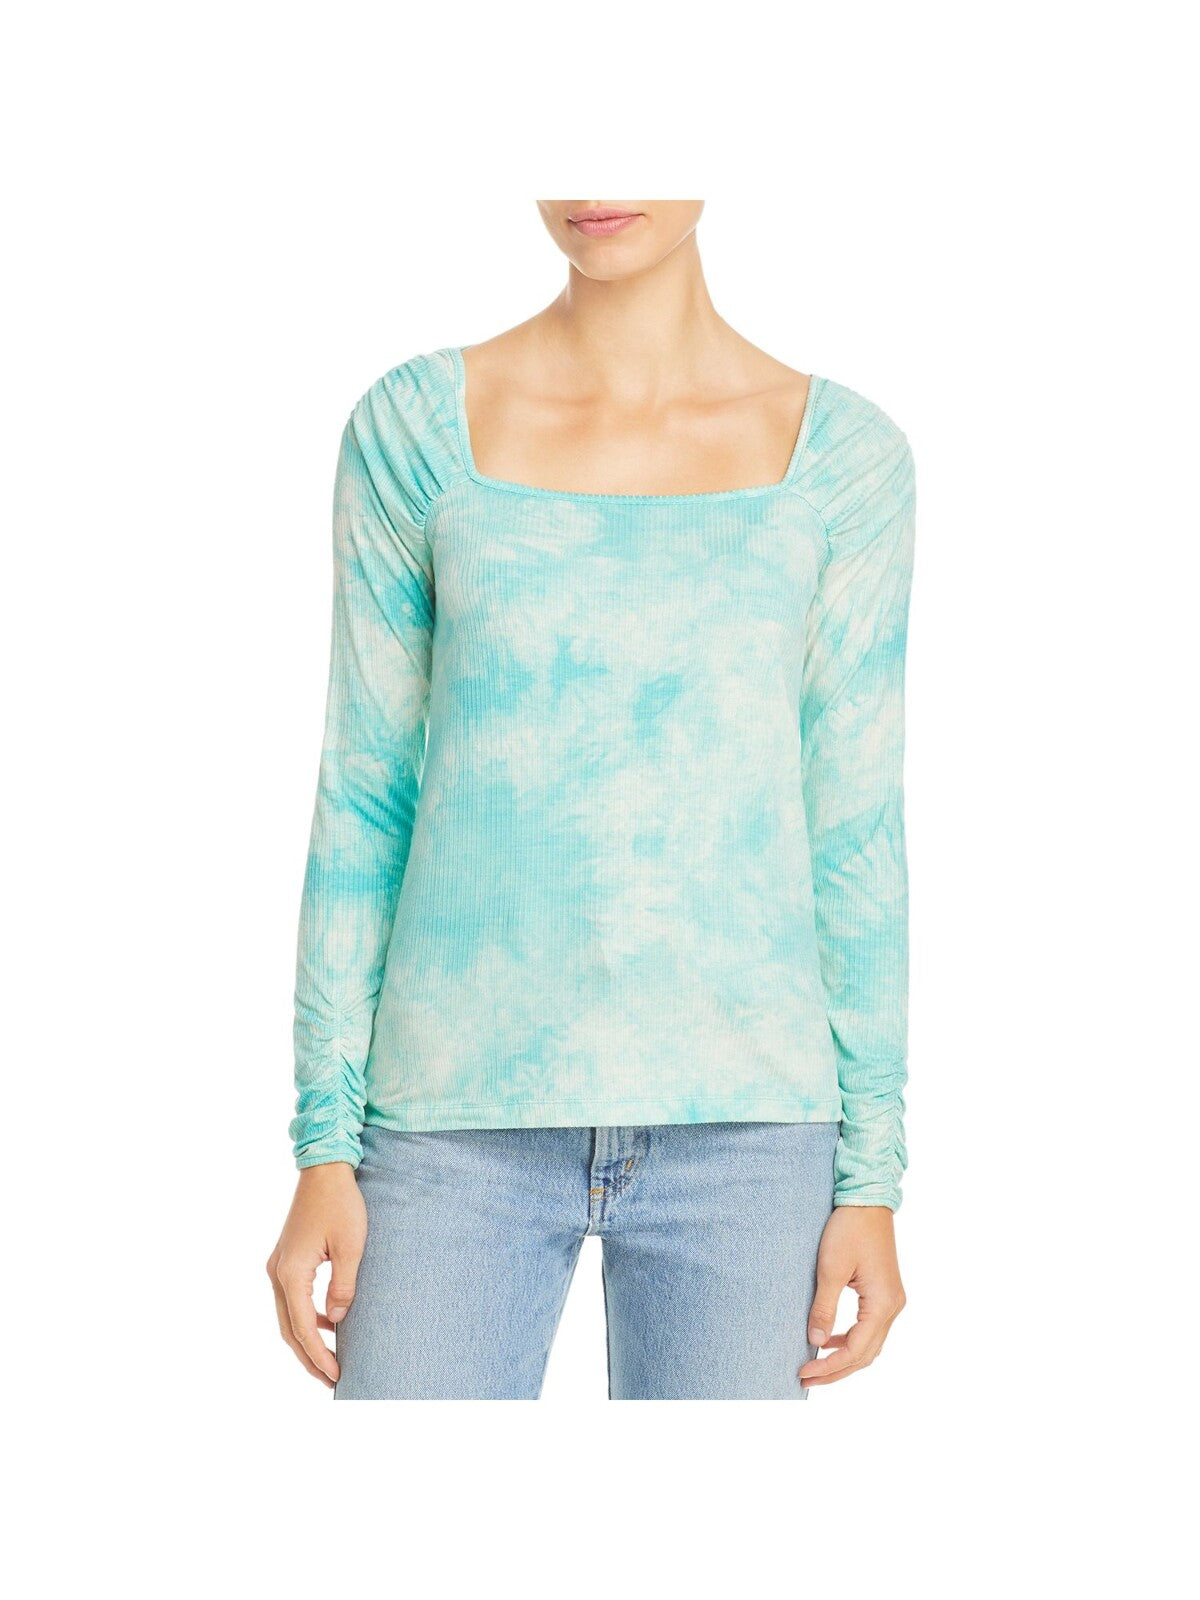 SINGLE THREAD Womens Aqua Stretch Ruched Ribbed Tie Dye Long Sleeve Square Neck Top M